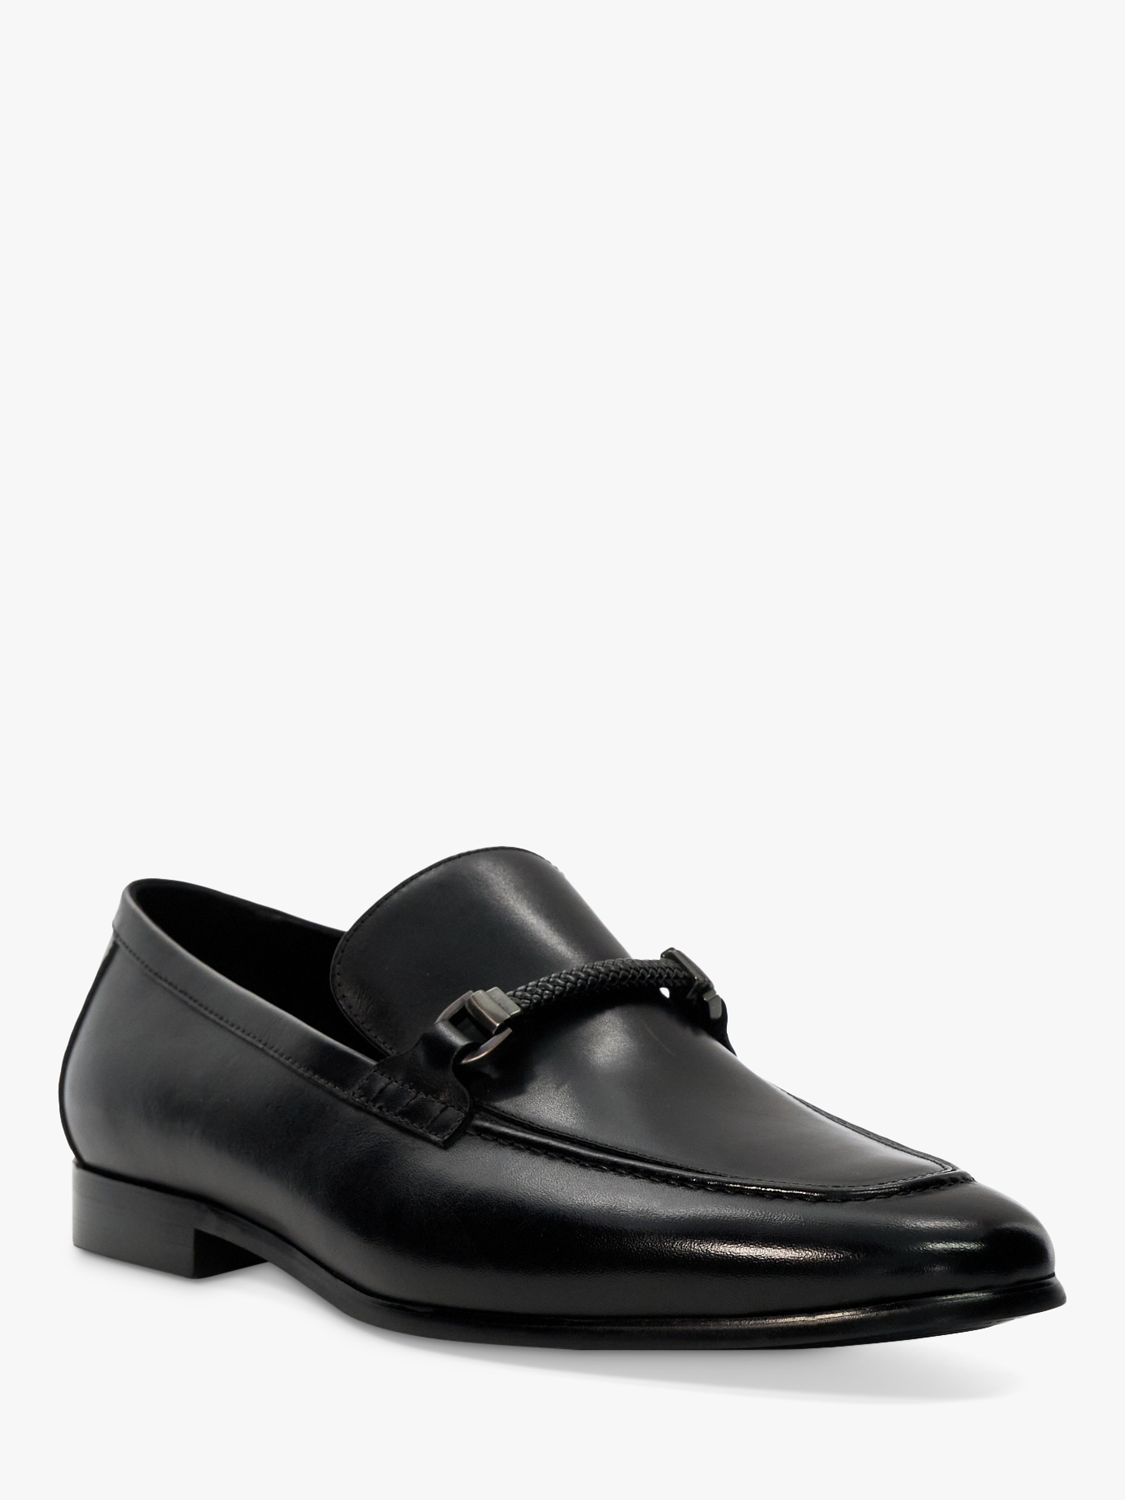 Dune Scilly Leather Loafers, Black, 9